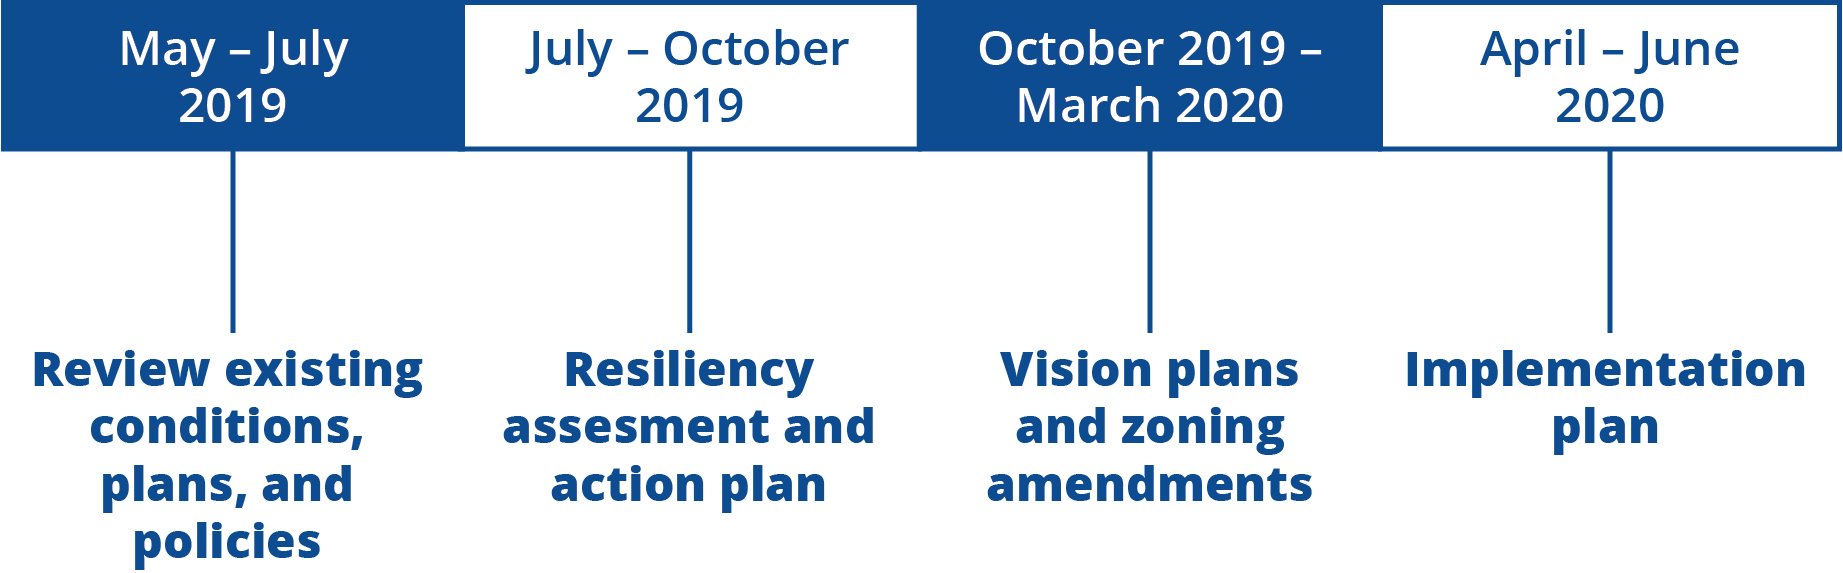 May - July 2019: Review existing conditions, plans, and policies; July - October 2019: resiliency assessment and action plan; October 2019 - March 2020: Vision plans/zoning amendments; April - June 2020: Implementation plan